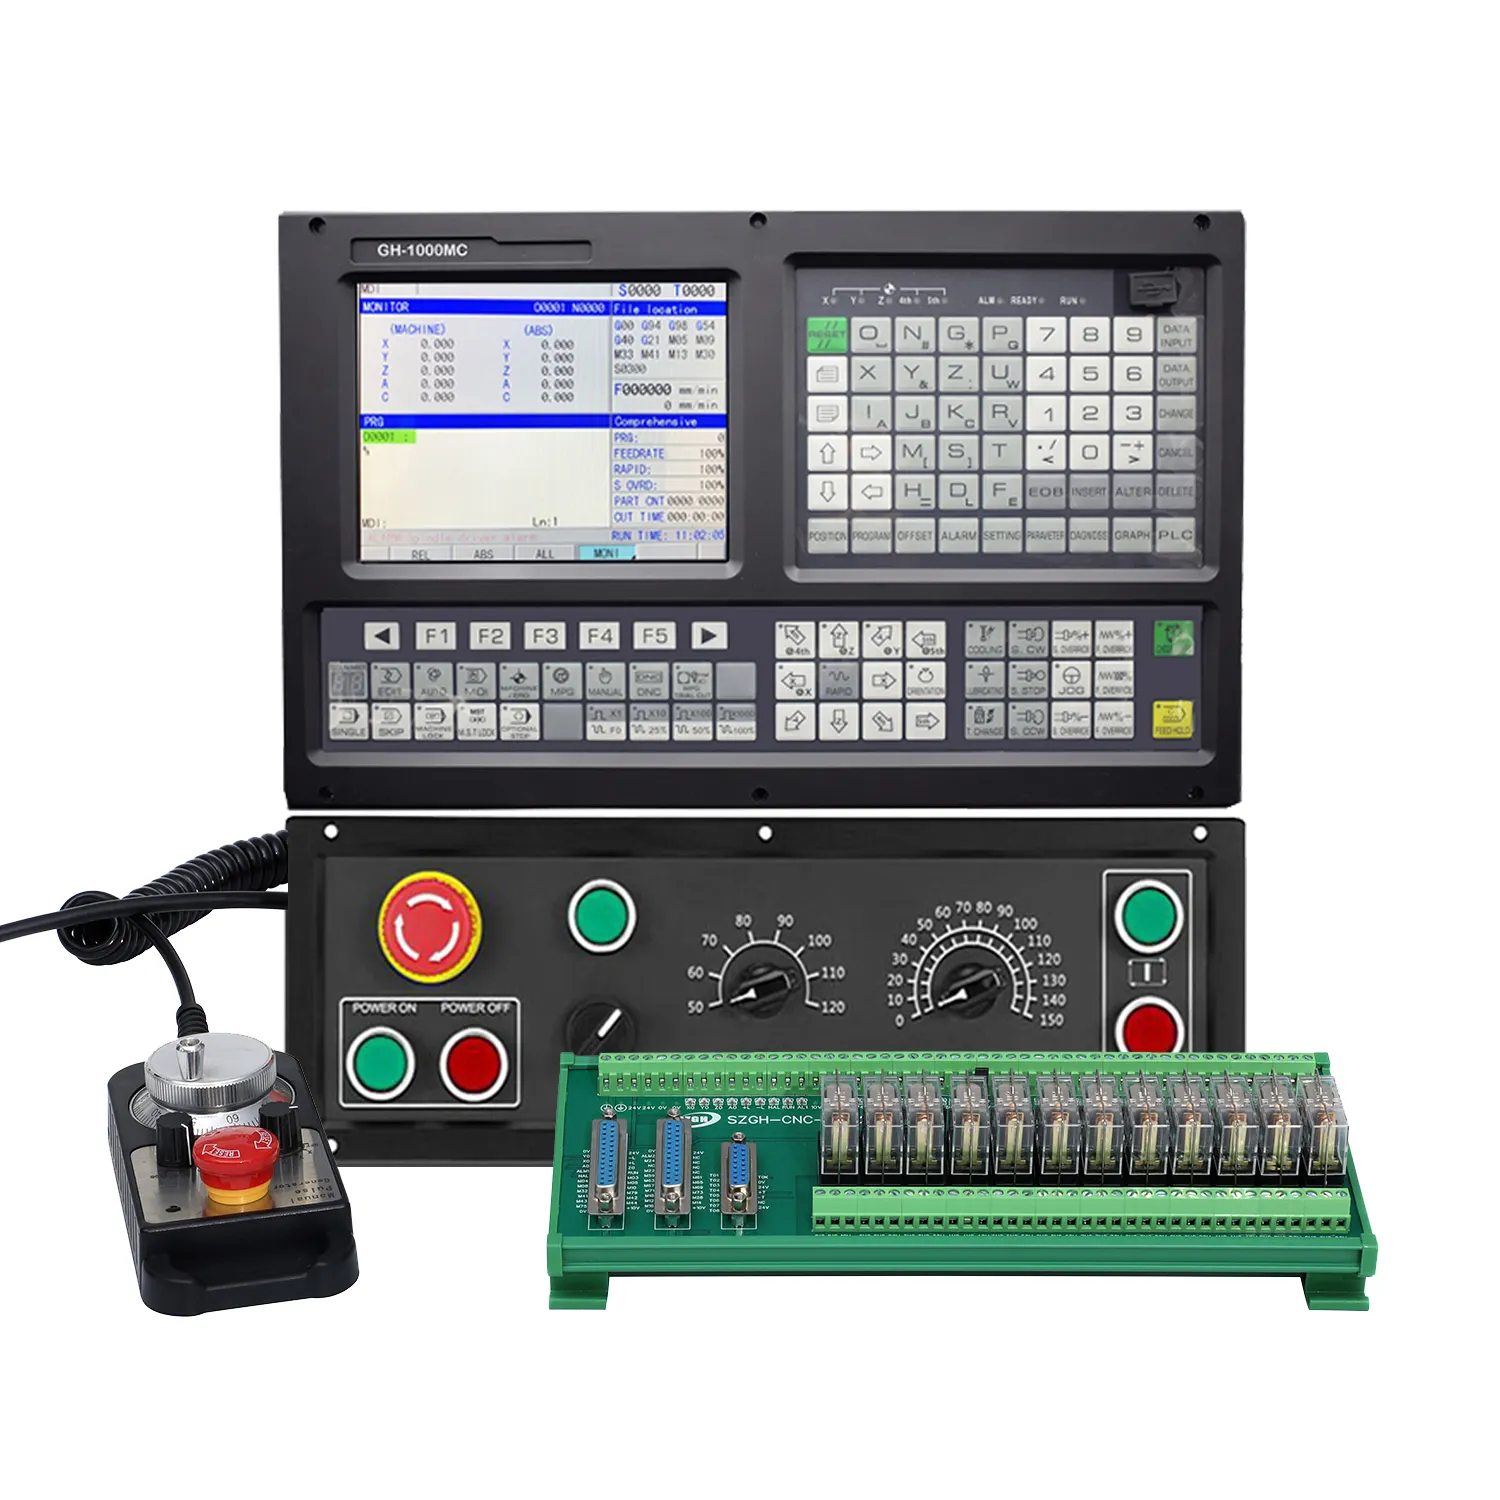 Best cnc controller 4th 5 axis cnc milling controller kit price China manufacturer